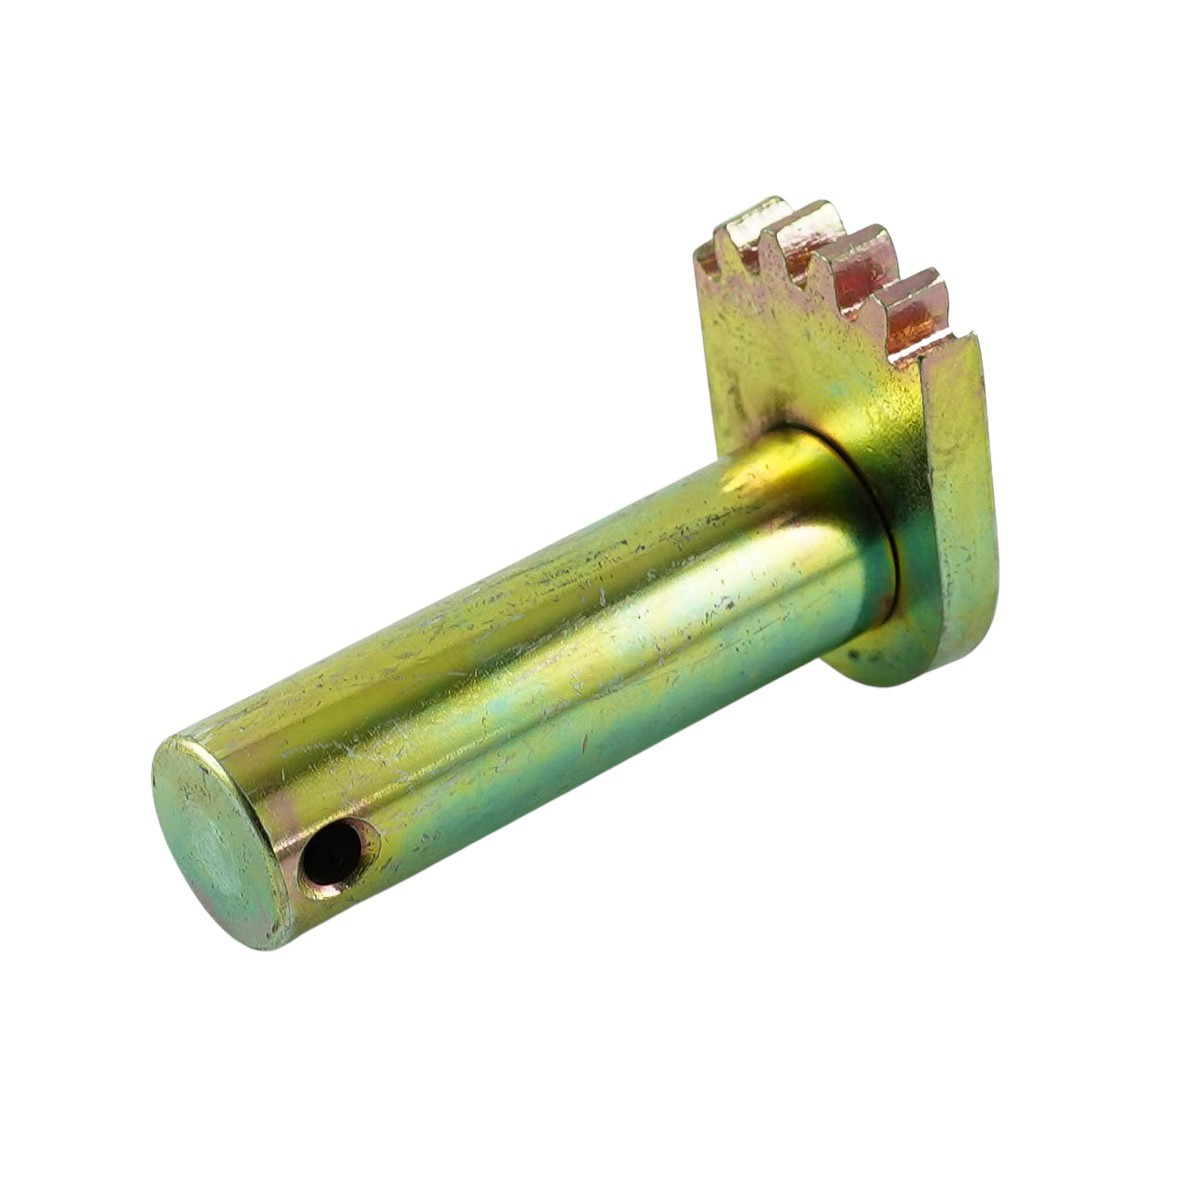 Tooth pin, shaft No. 40012477 Ls Tractor